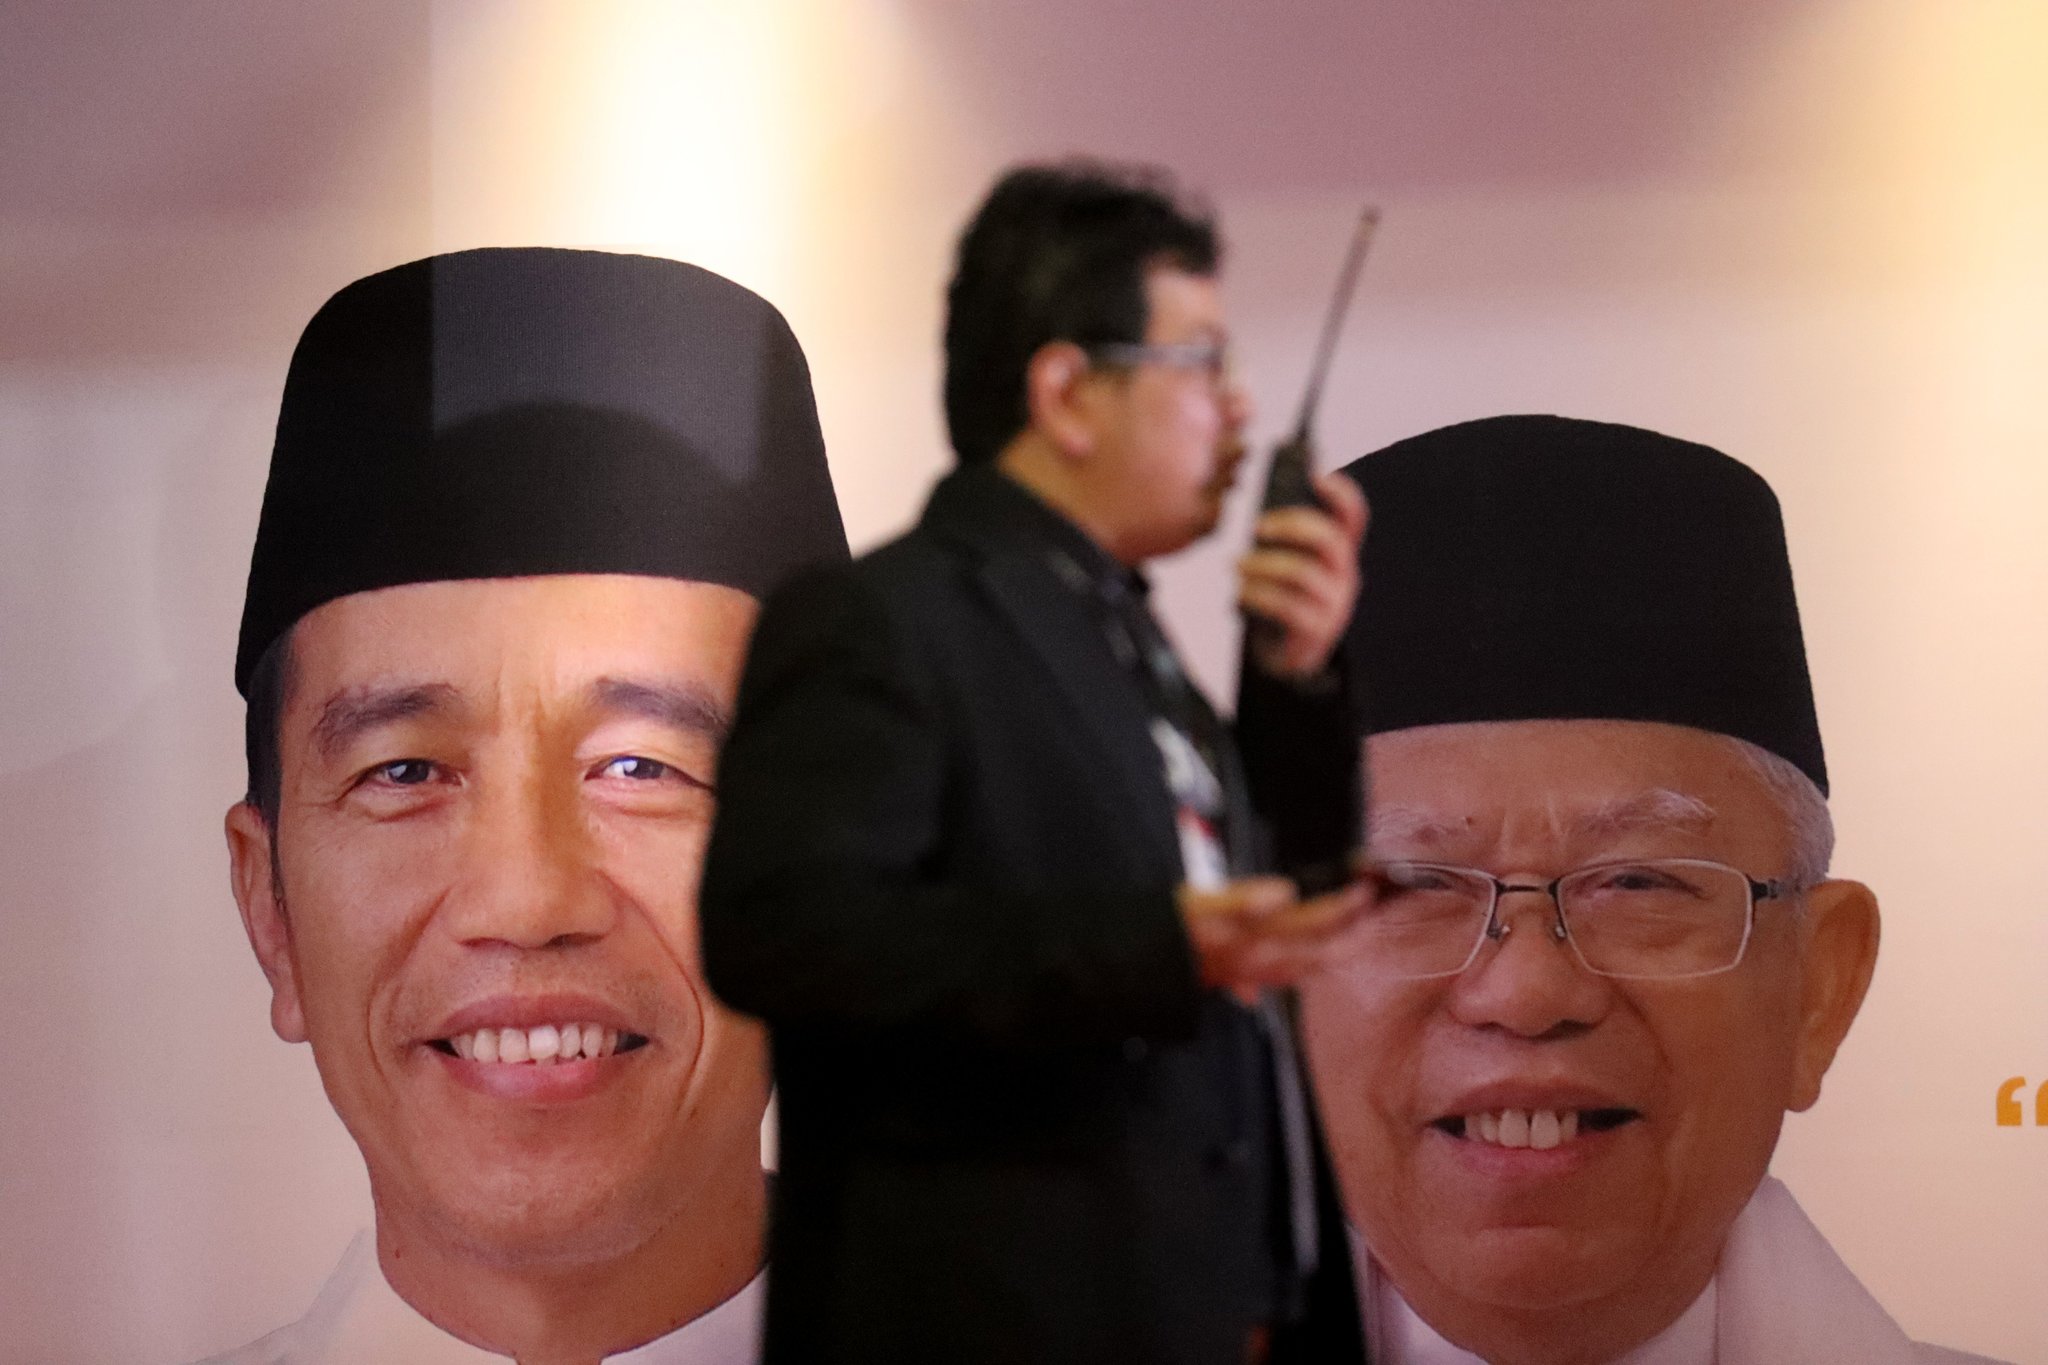 Indonesia’s Next Election Is in April. The Islamists Have Already Won.